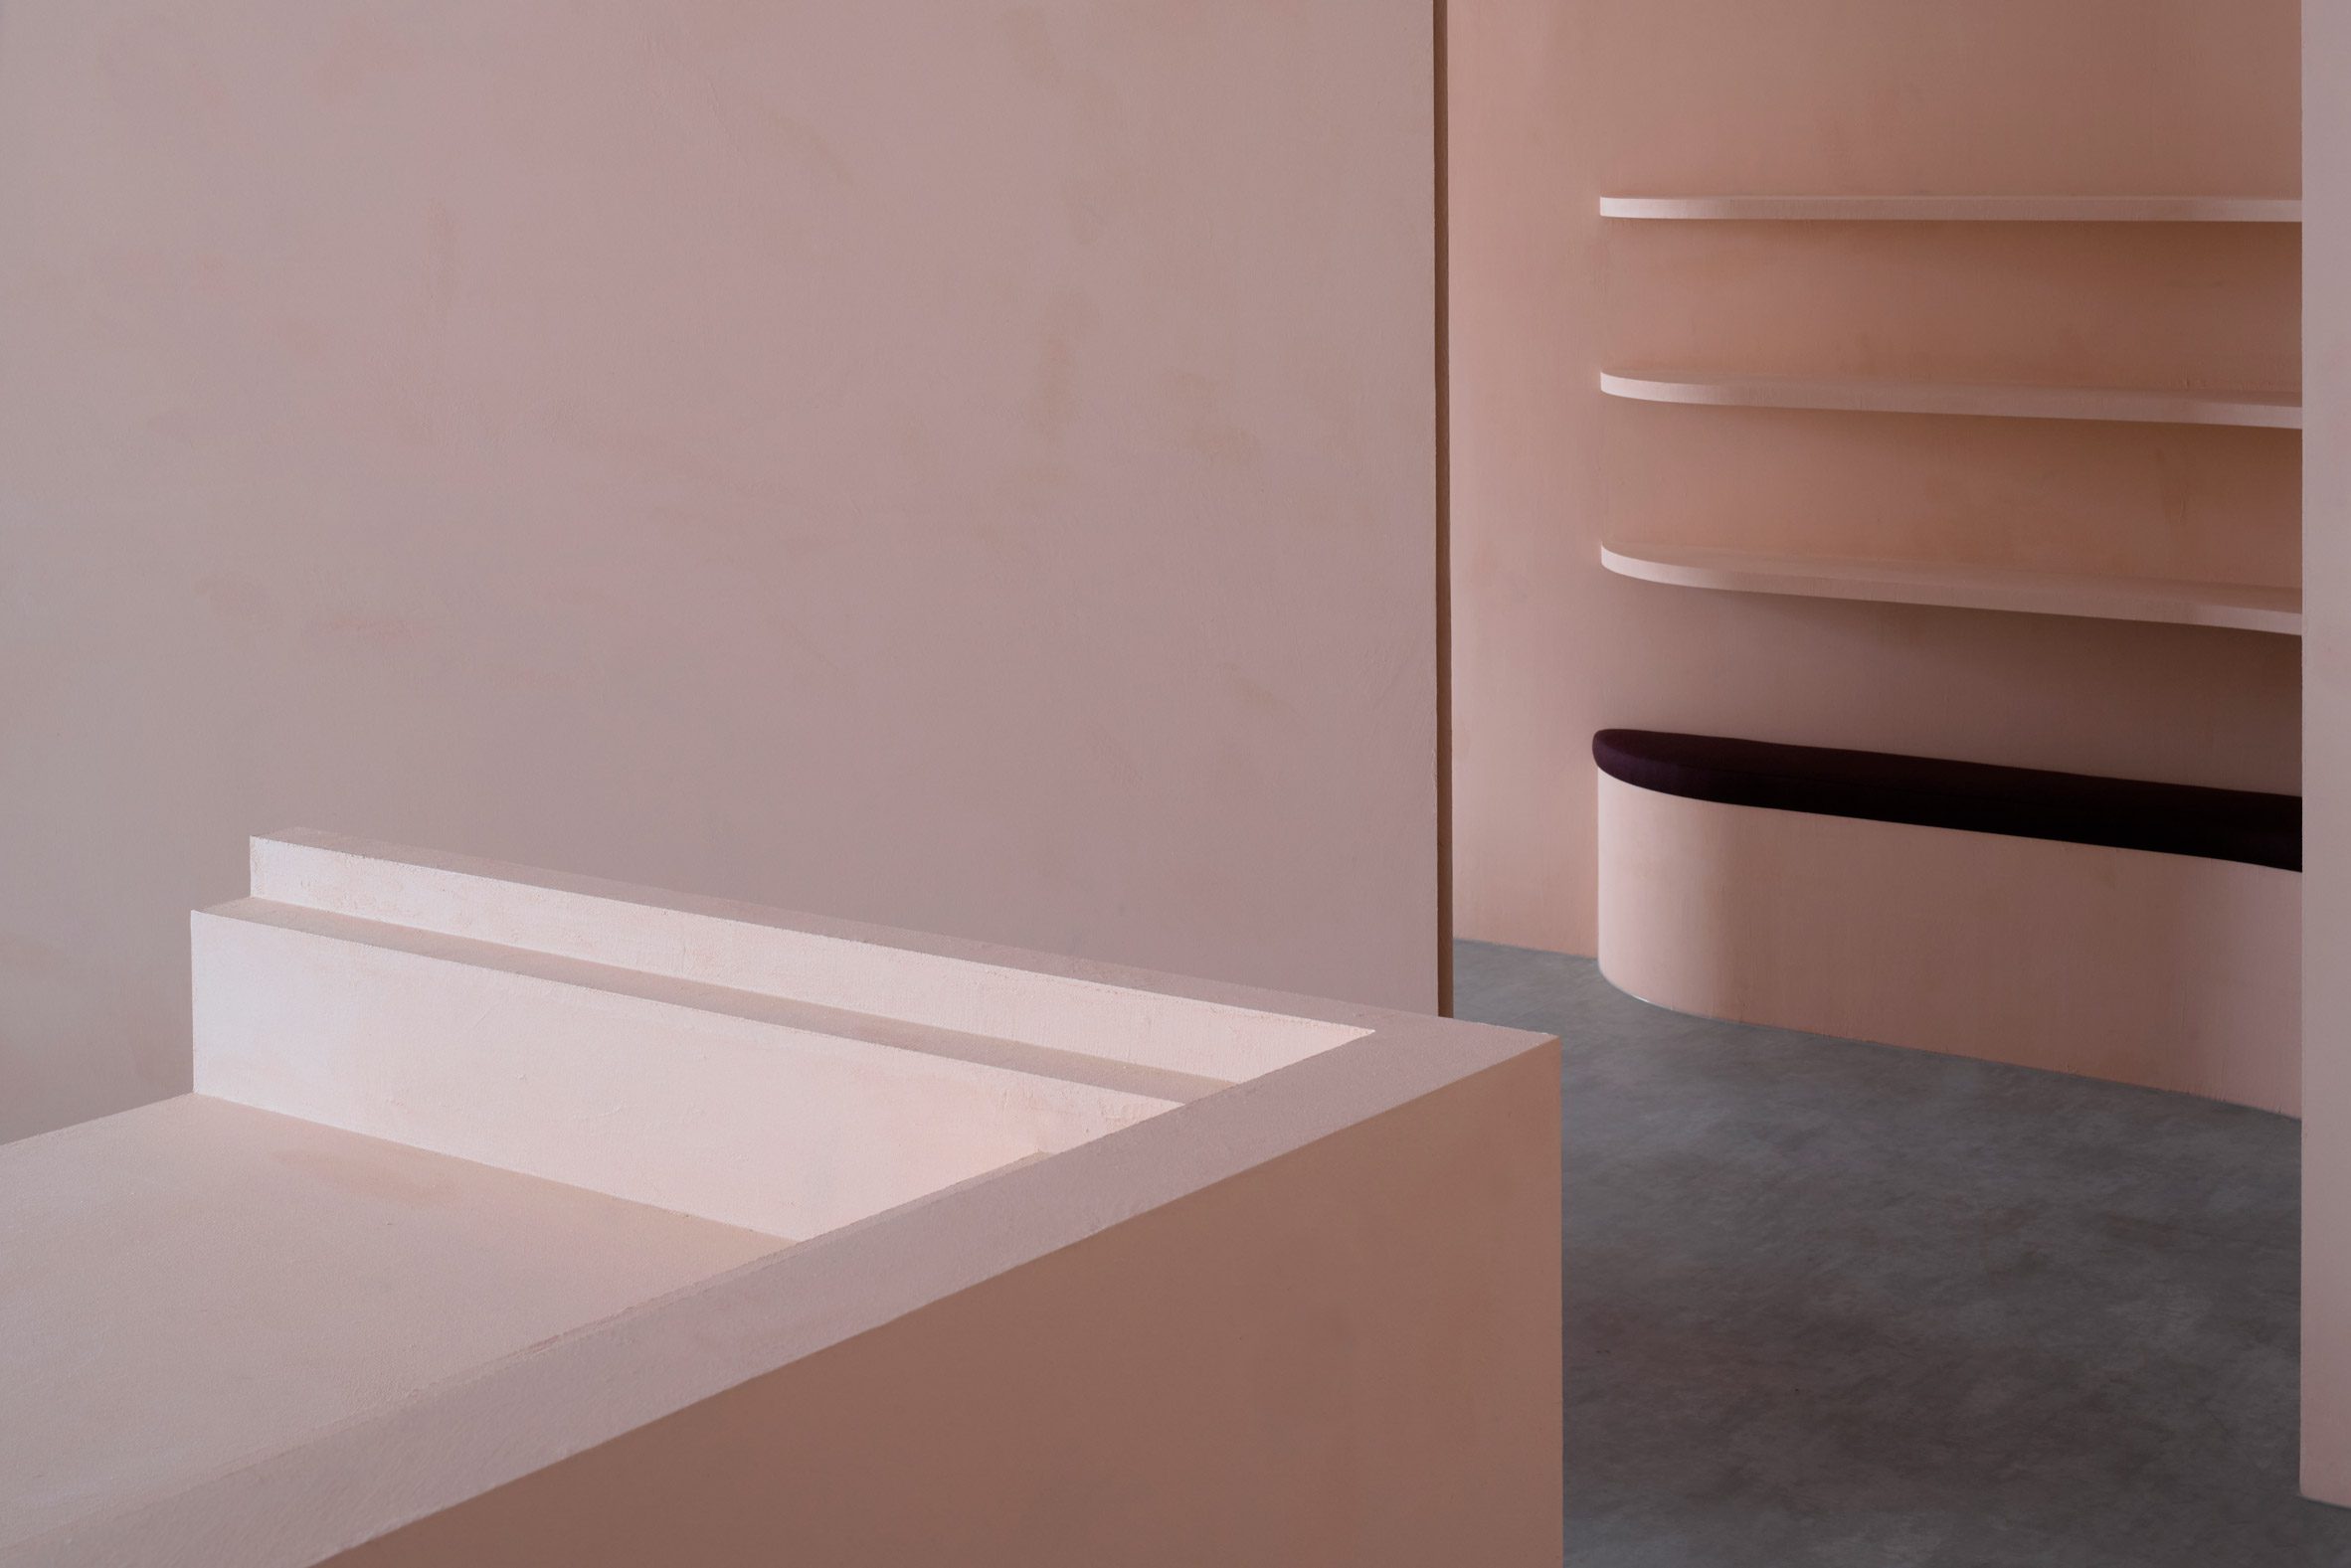 Details of the pink plaster elements within the student centre